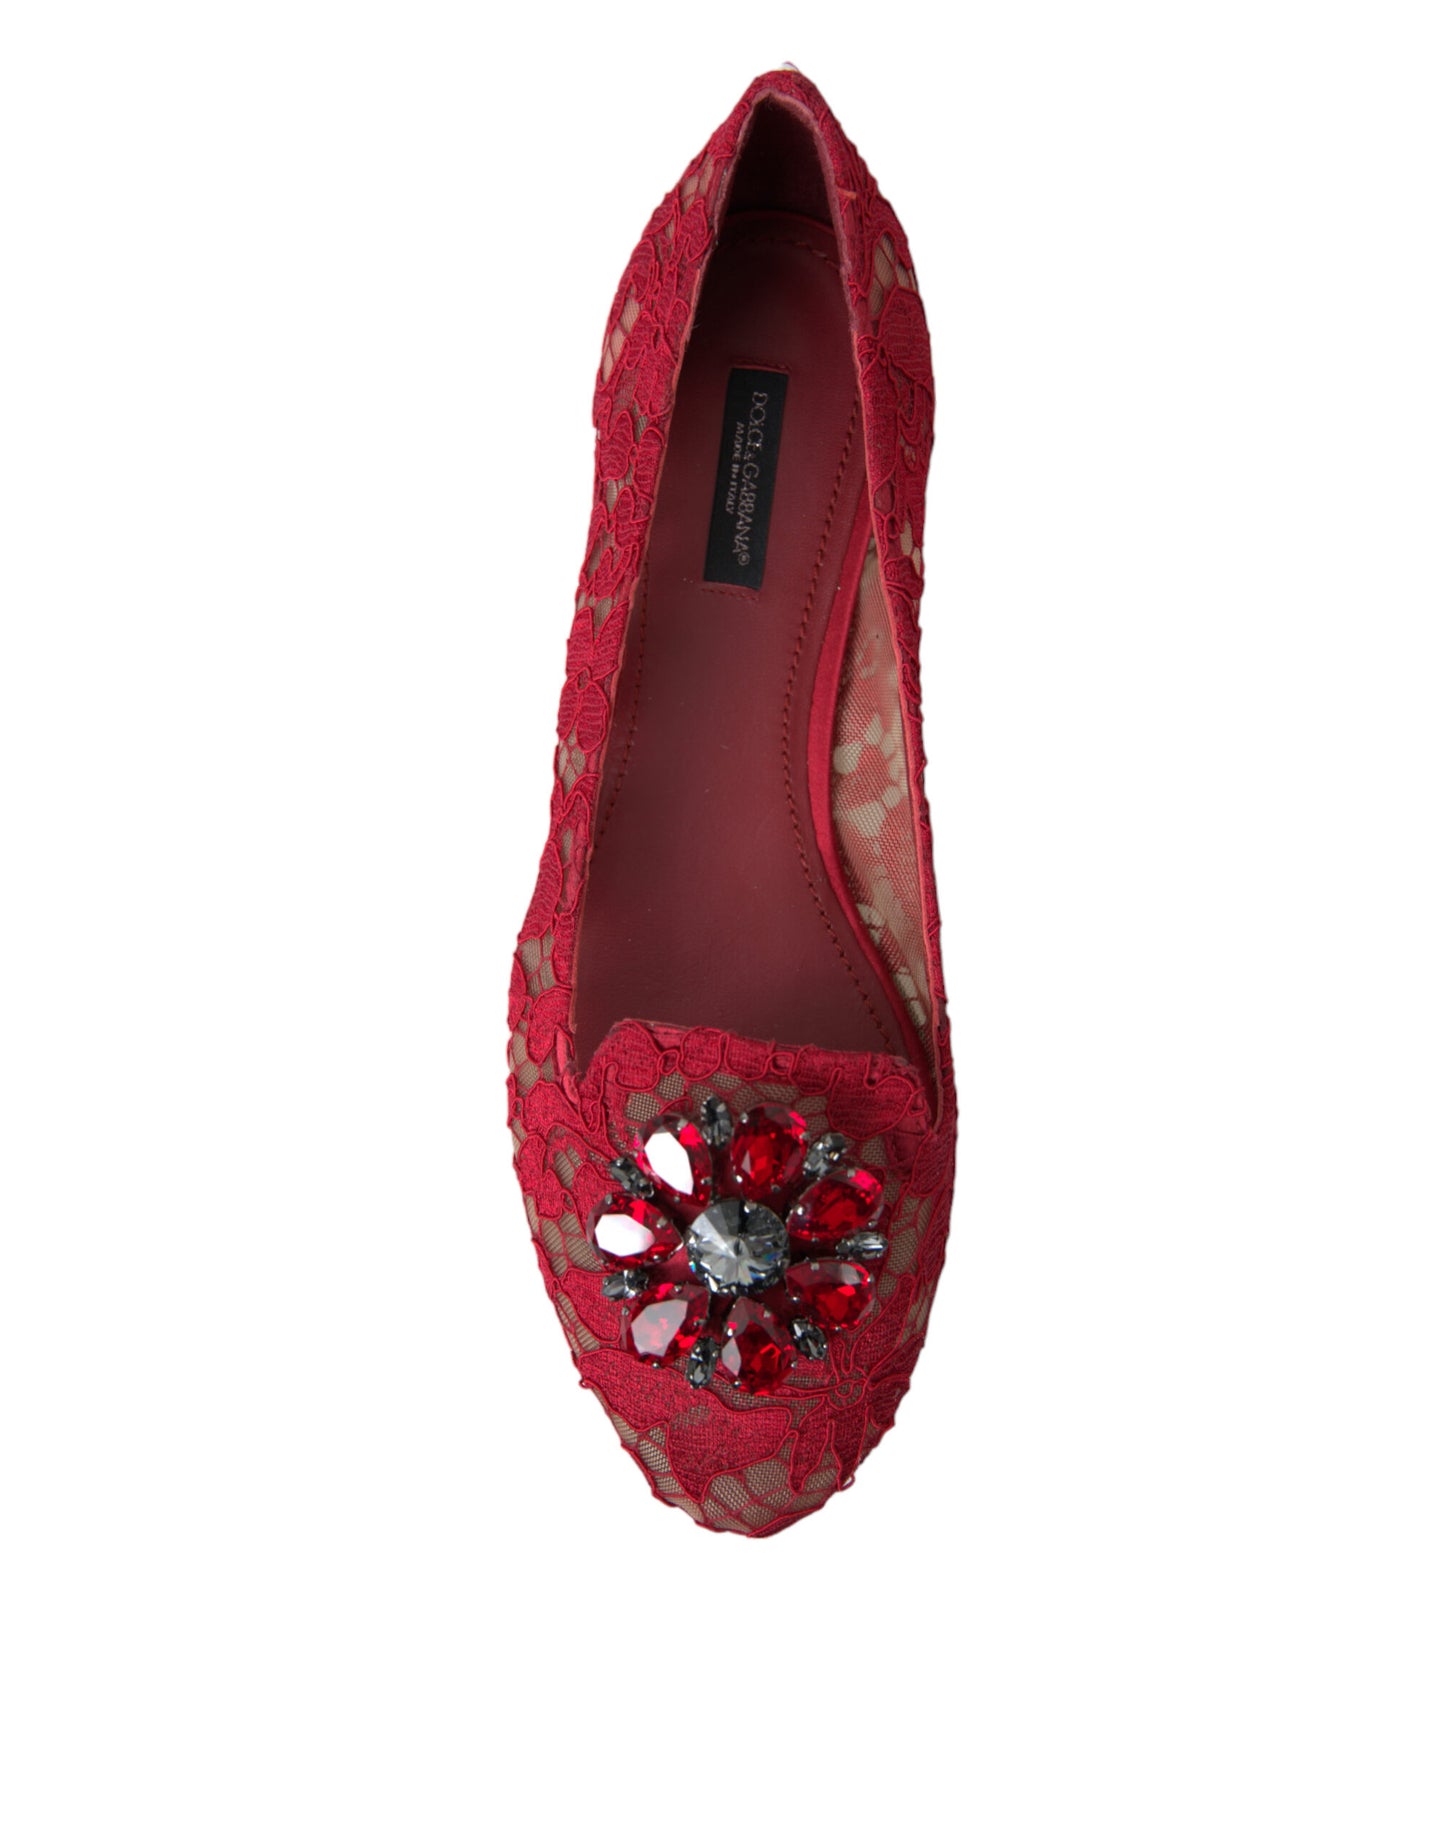 Elegant Floral Lace Vally Flats